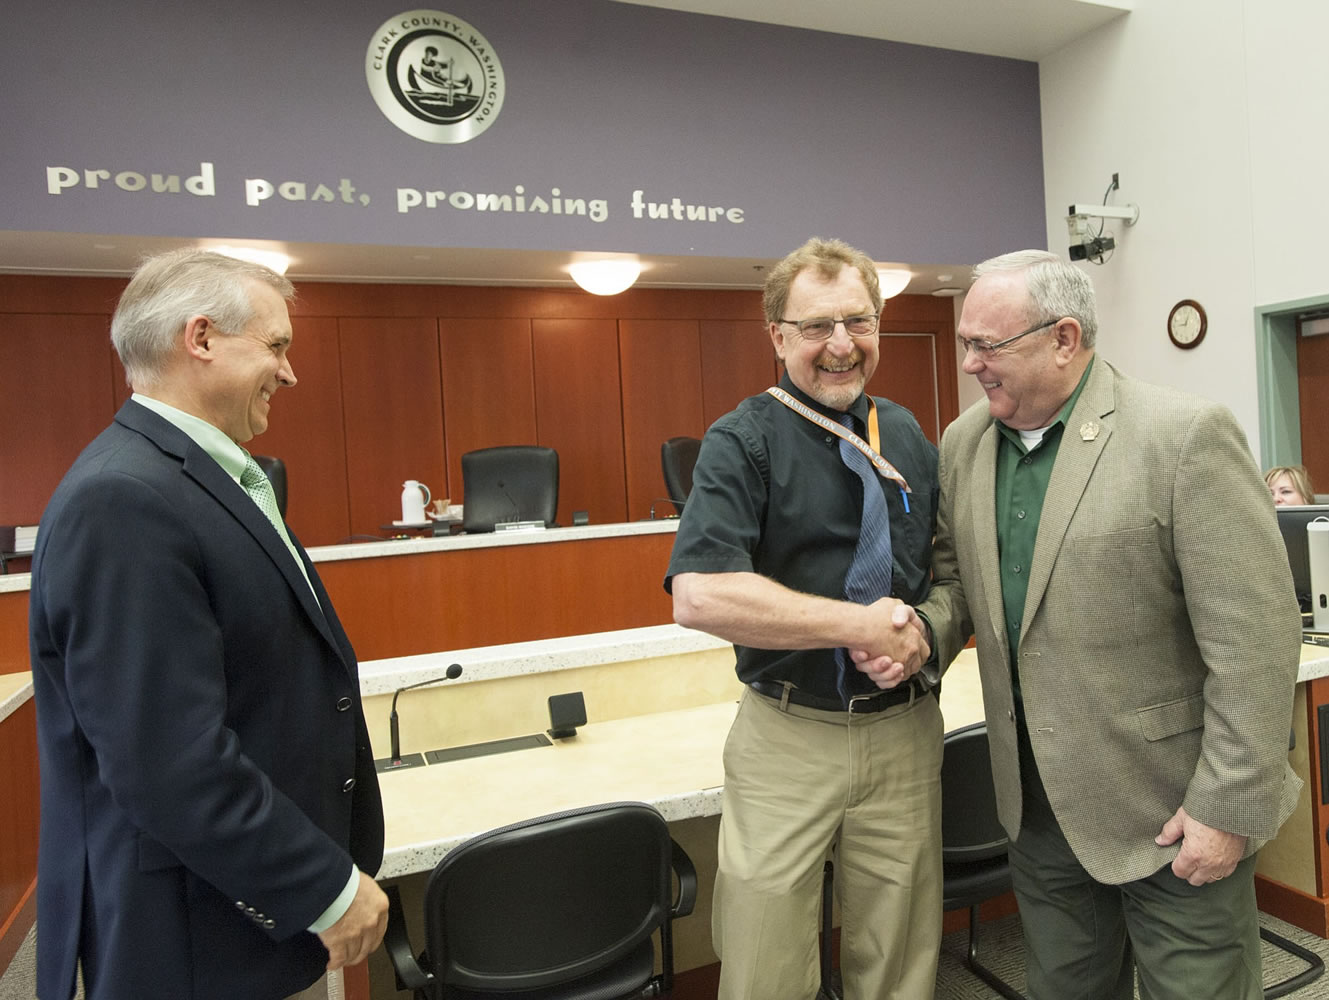 Clark County Councilor Tom Mielke, right, congratulates Gary Bickett, Clark County Public Health's food safety and solid waste program manager, on his upcoming retirement after nearly 32 years with the county.